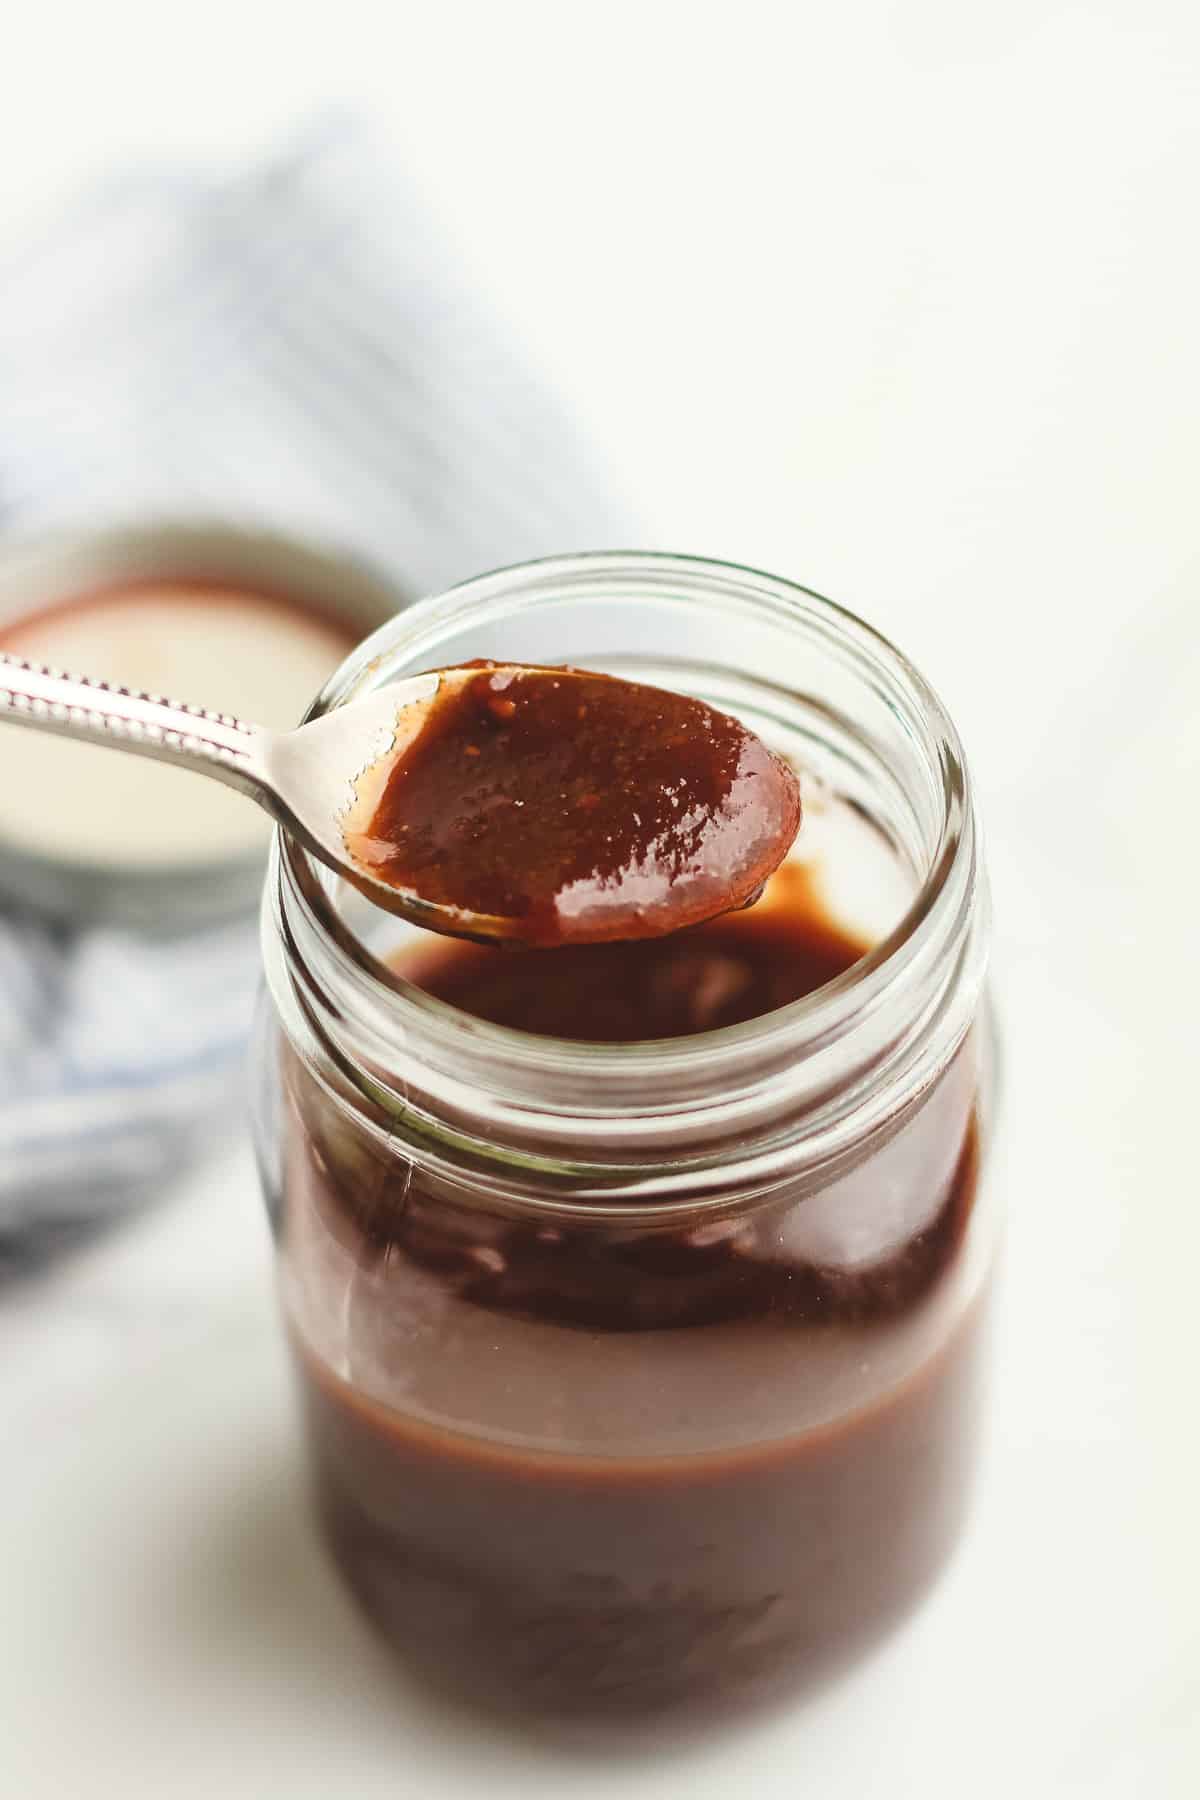 A spoonful of homemade barbecue sauce.